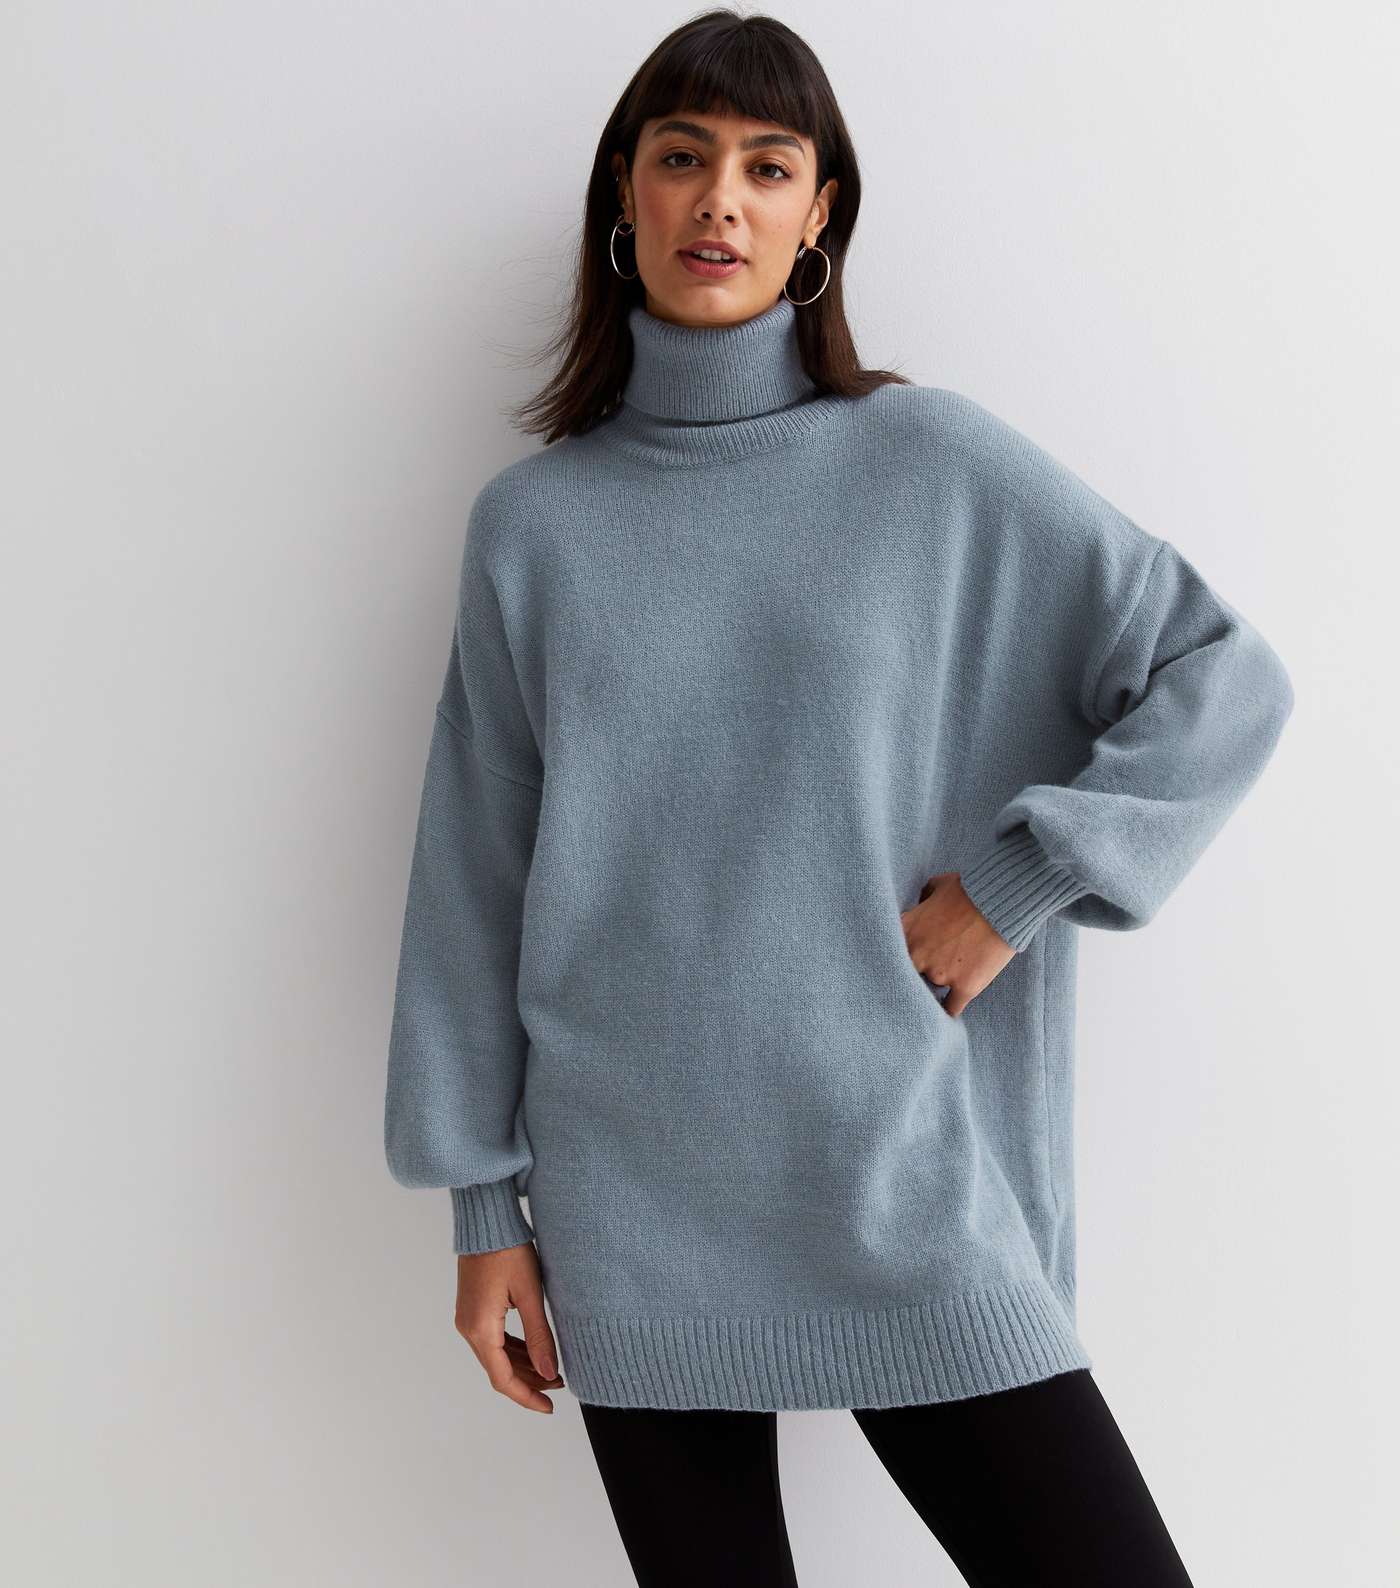 Gini London Pale Grey Knit Roll Neck Jumper